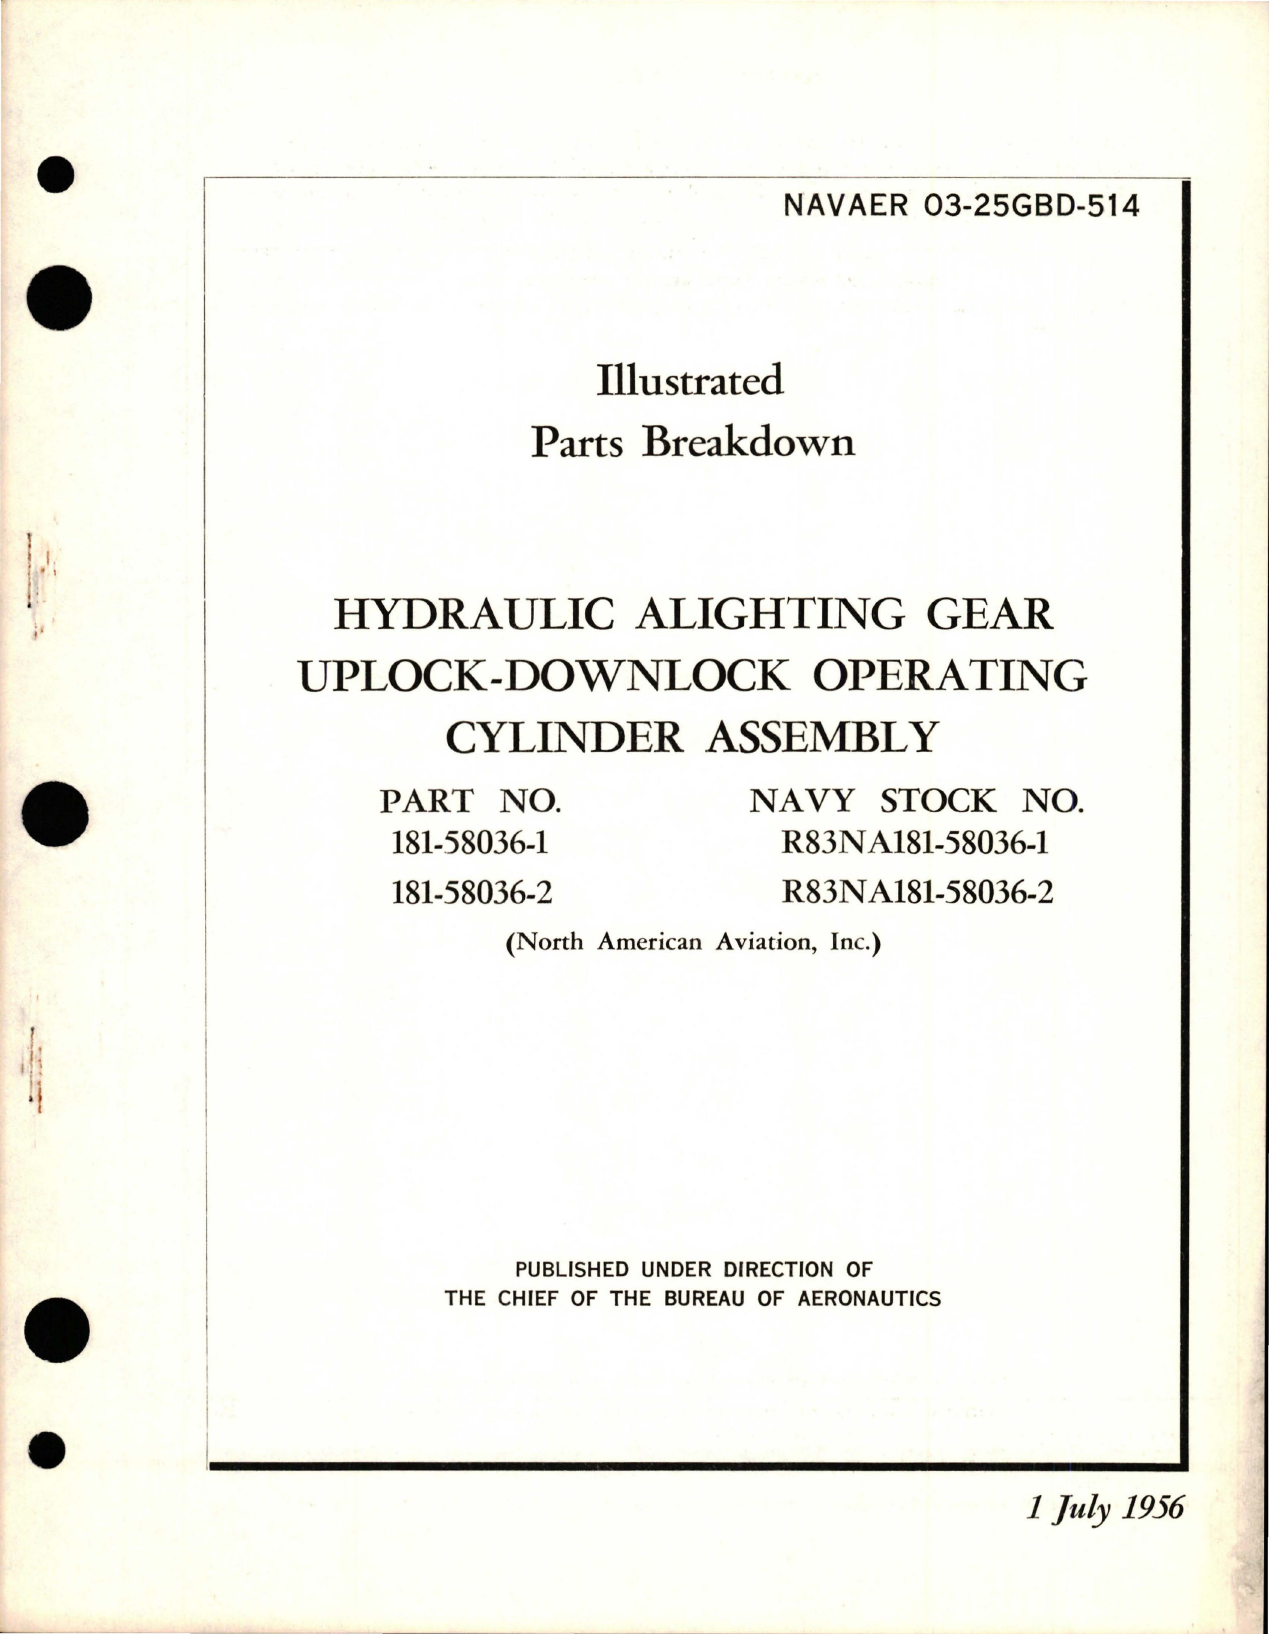 Sample page 1 from AirCorps Library document: Illustrated Parts Breakdown for Hydraulic Alighting Gear Uplock-Downlock Operating Cylinder Assembly 